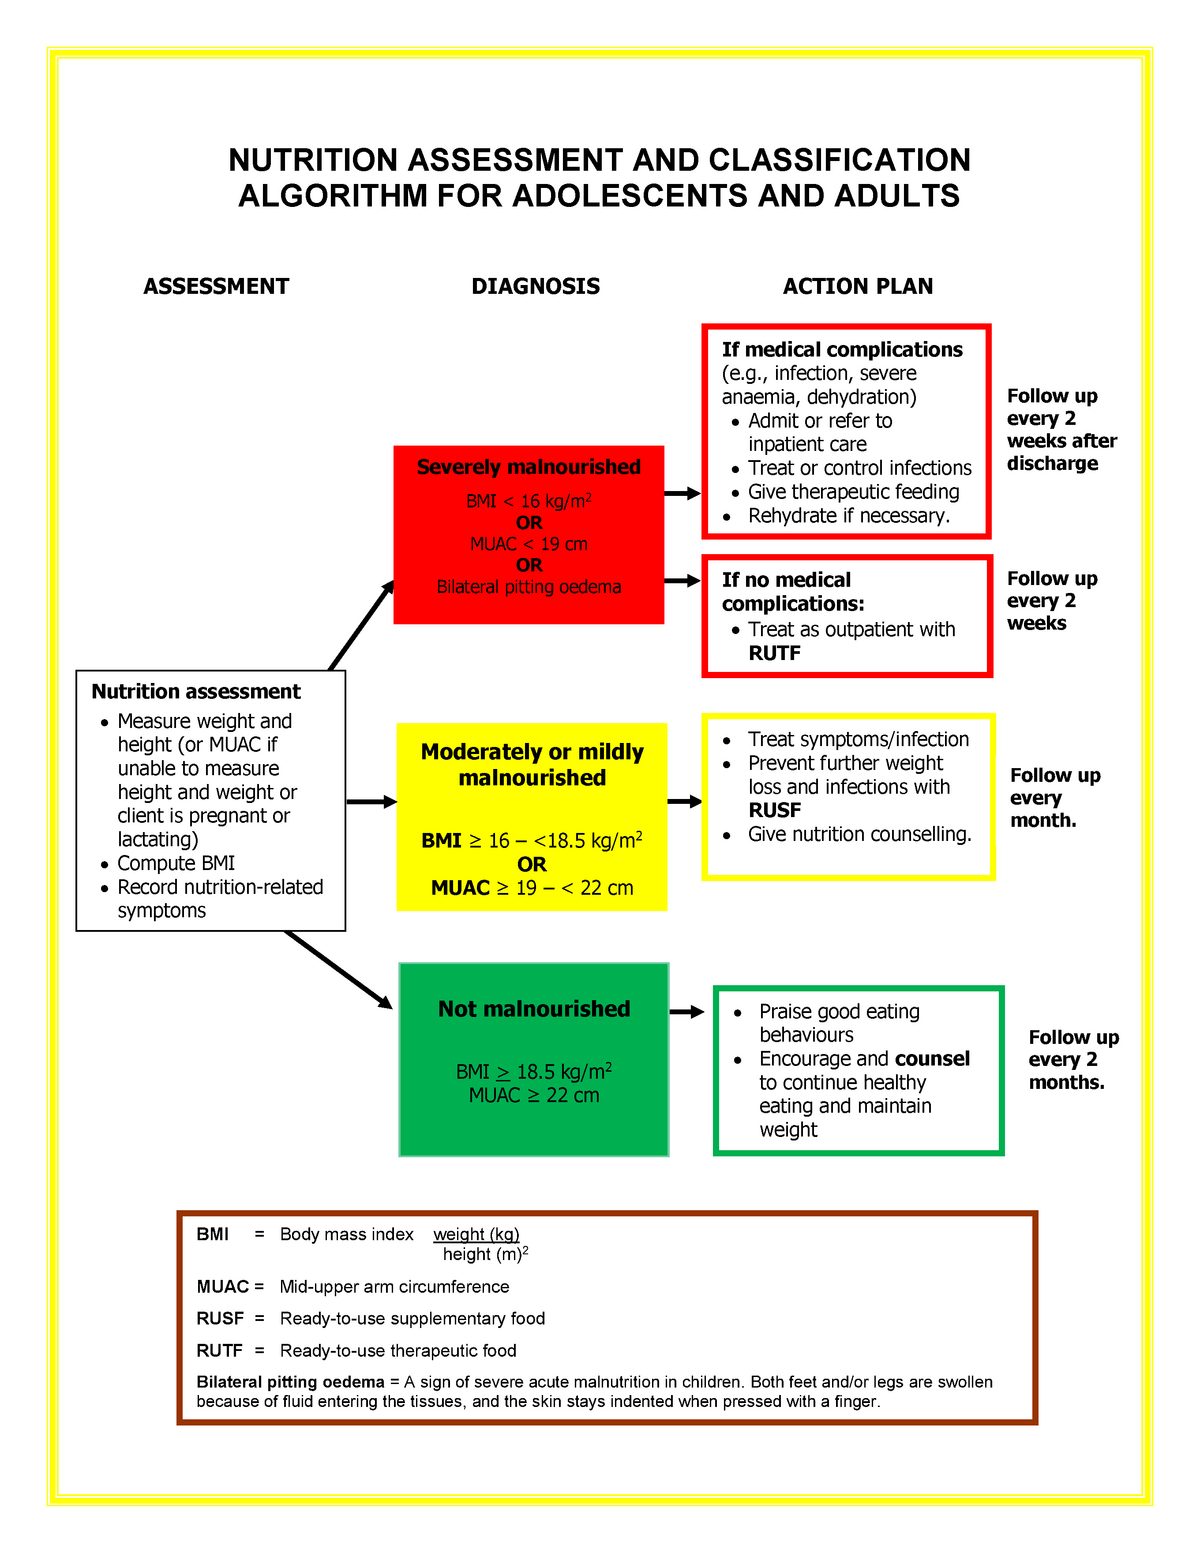 Namibia Algorithm For Nutrition Assessment And Classification